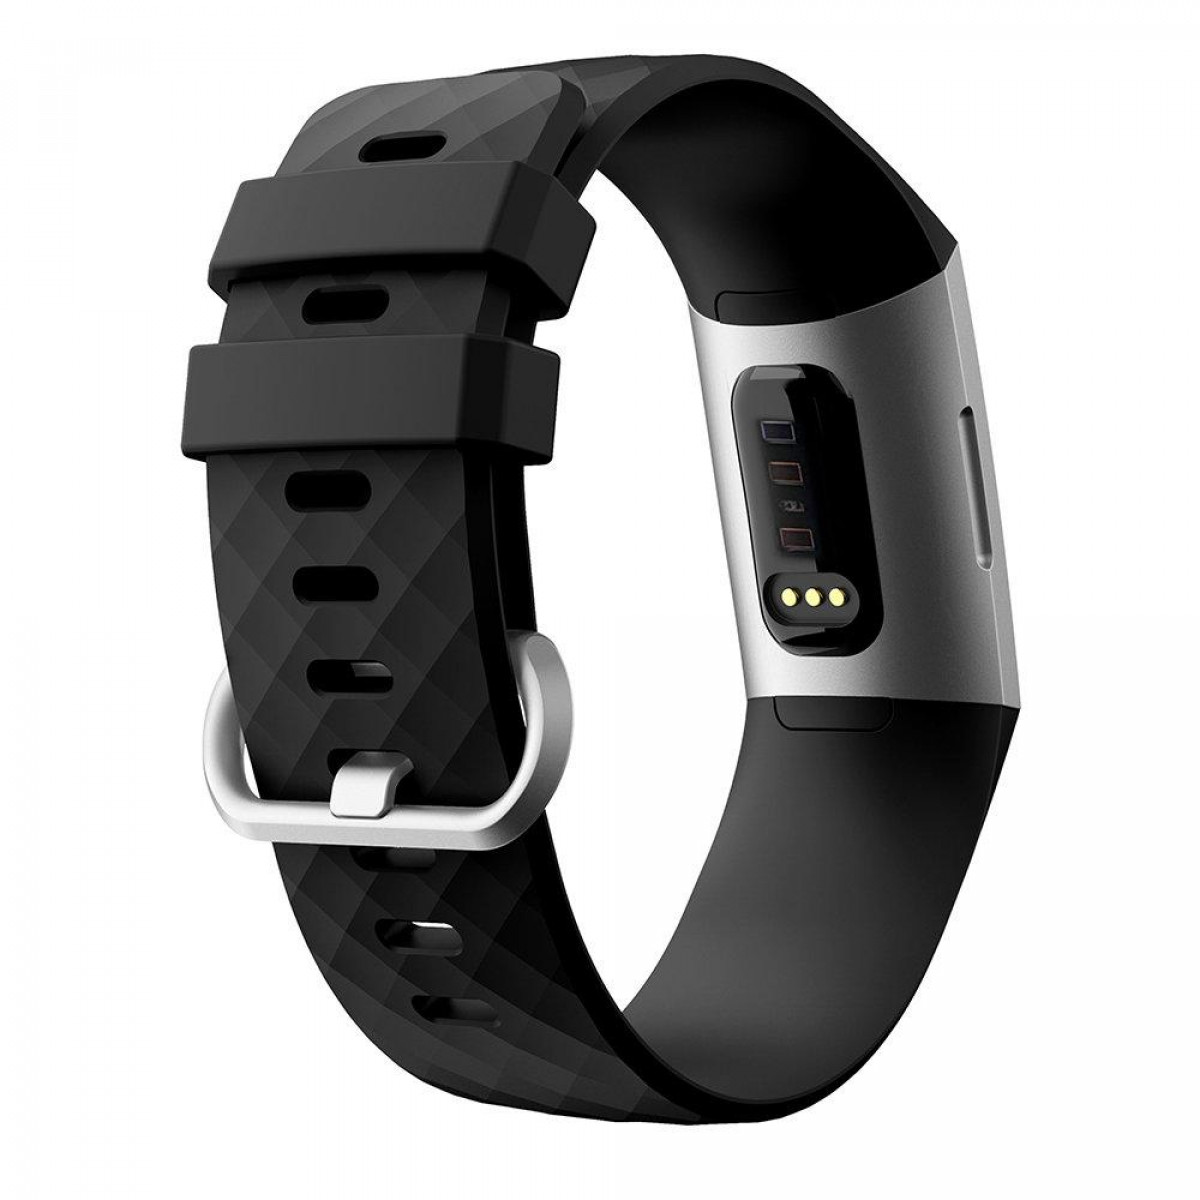 INF Fitbit Charge (S), Fitbit, Charge Schwarz 3/4 Ersatzarmband, Charge Schwarz 3/ Armband Silikon 4